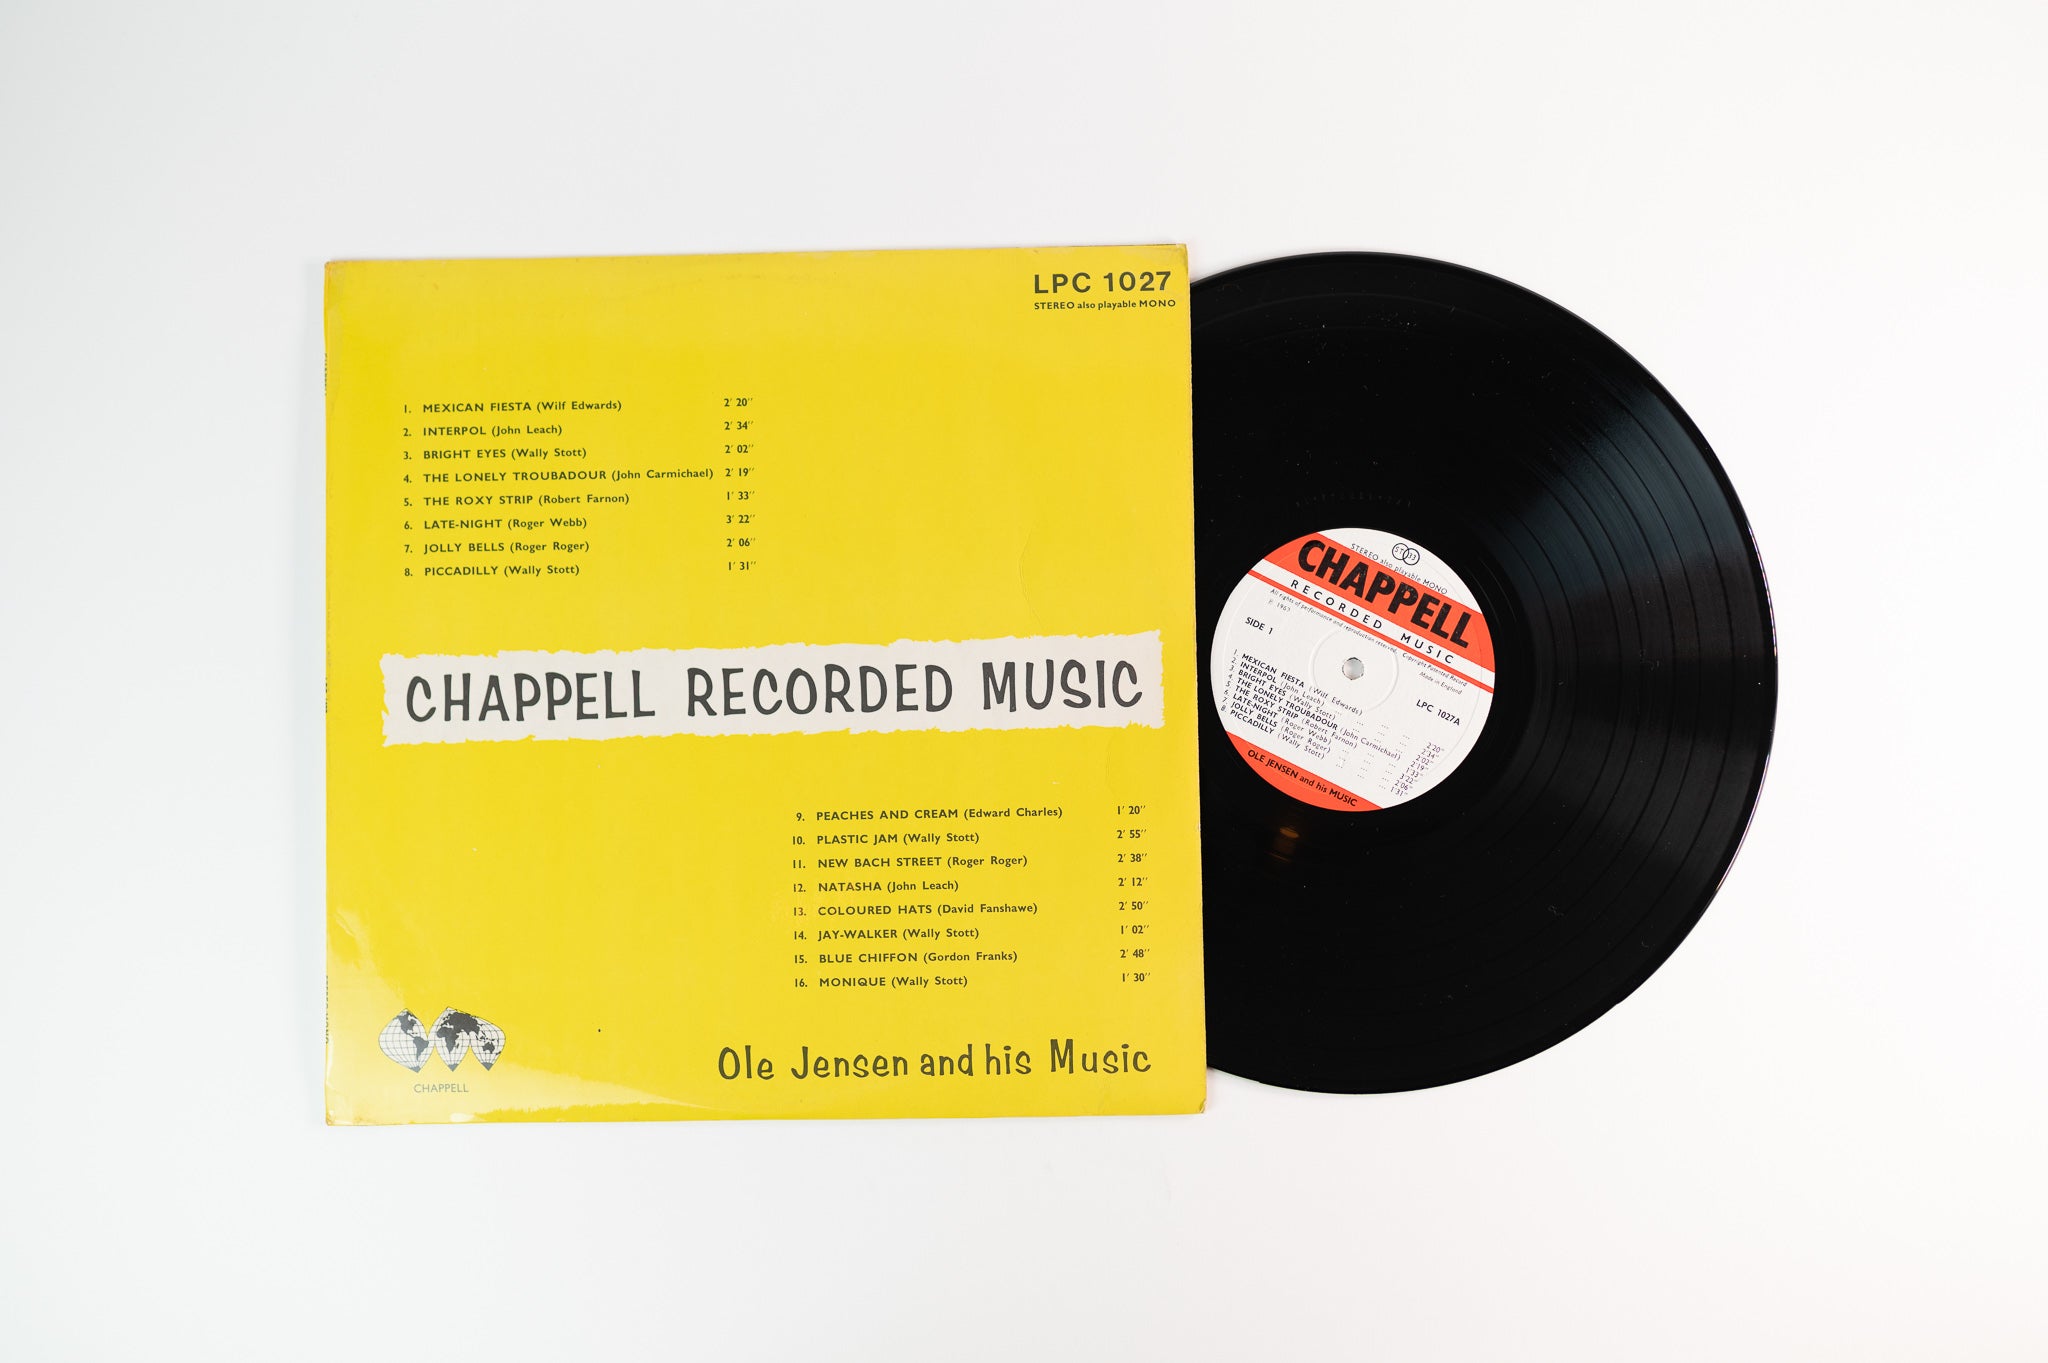 Ole Jensen And His Music on Chappell Recorded Music Library LP